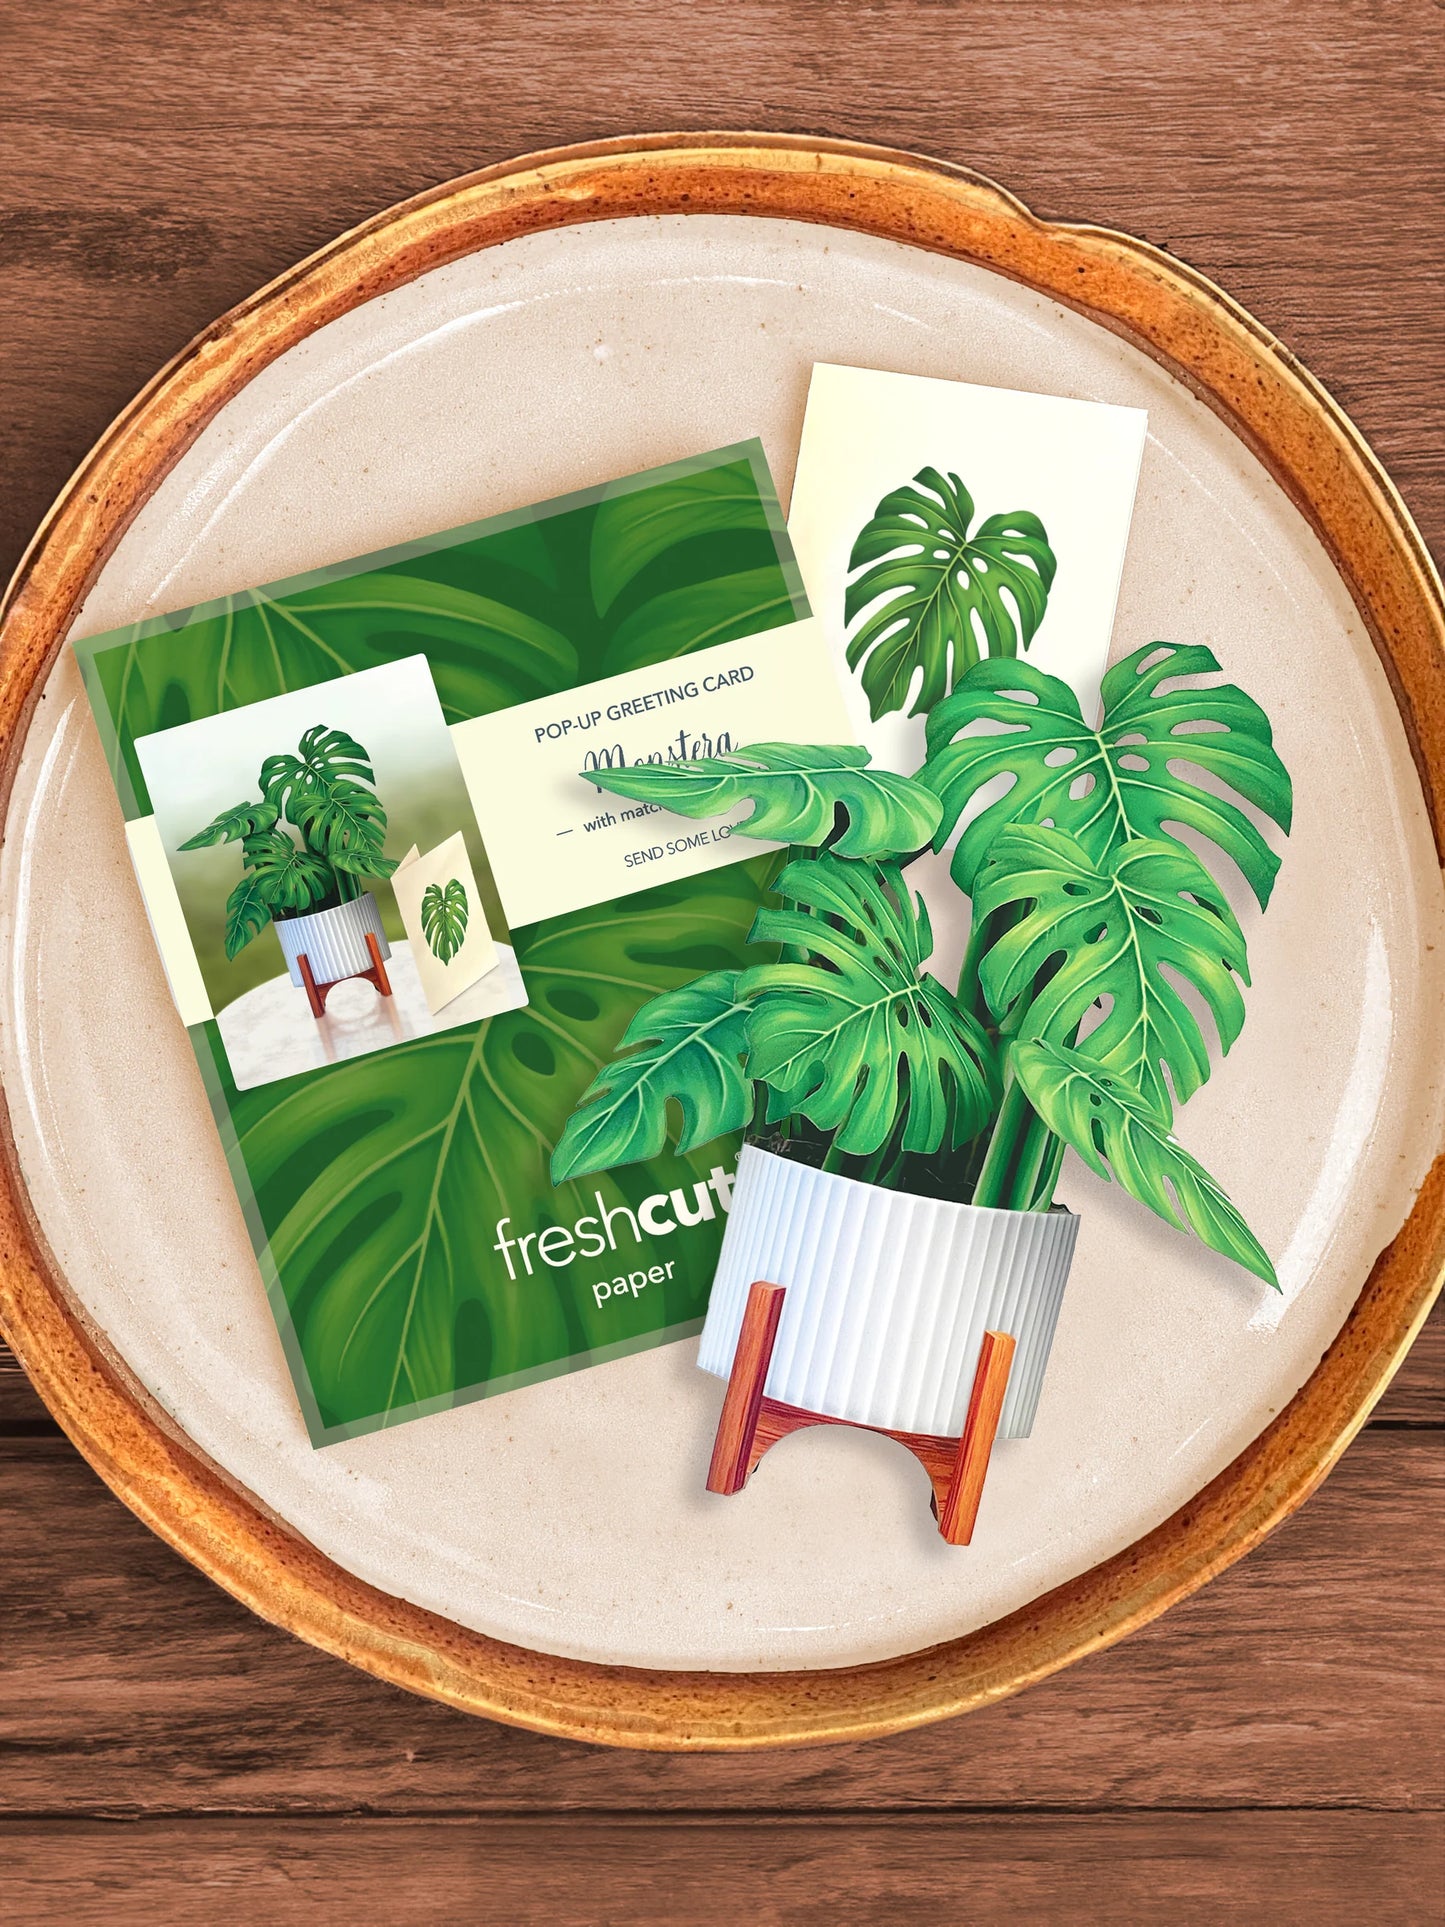 Monstera bouquet, enclosure card, and mailing envelope arranged on a tray.